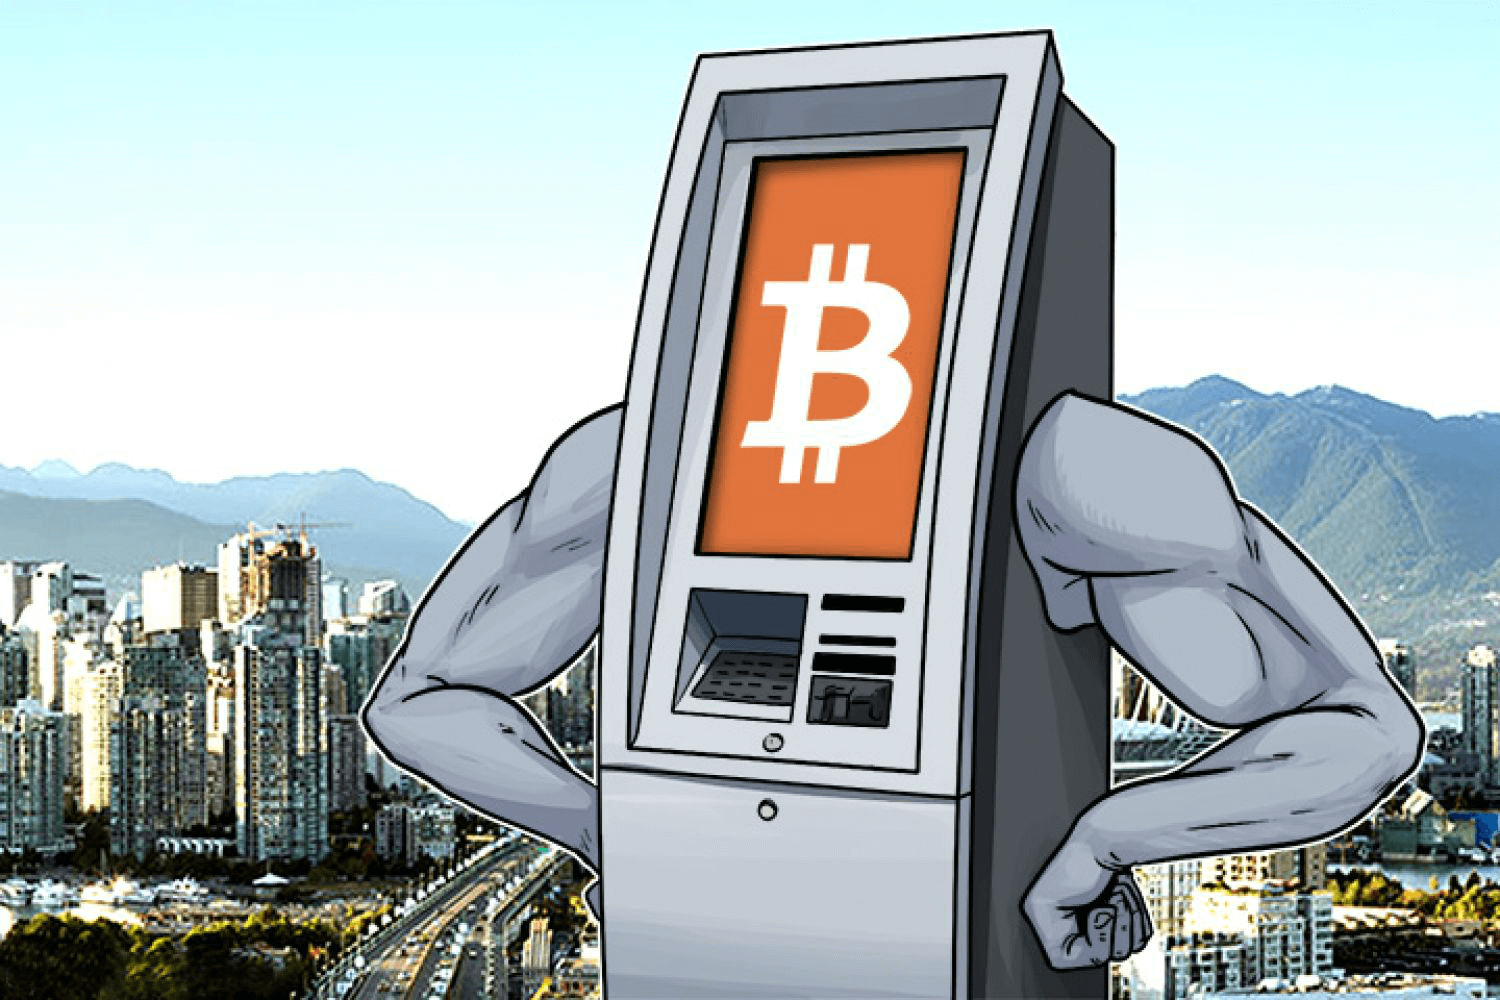 Get bitcoins from ATMs